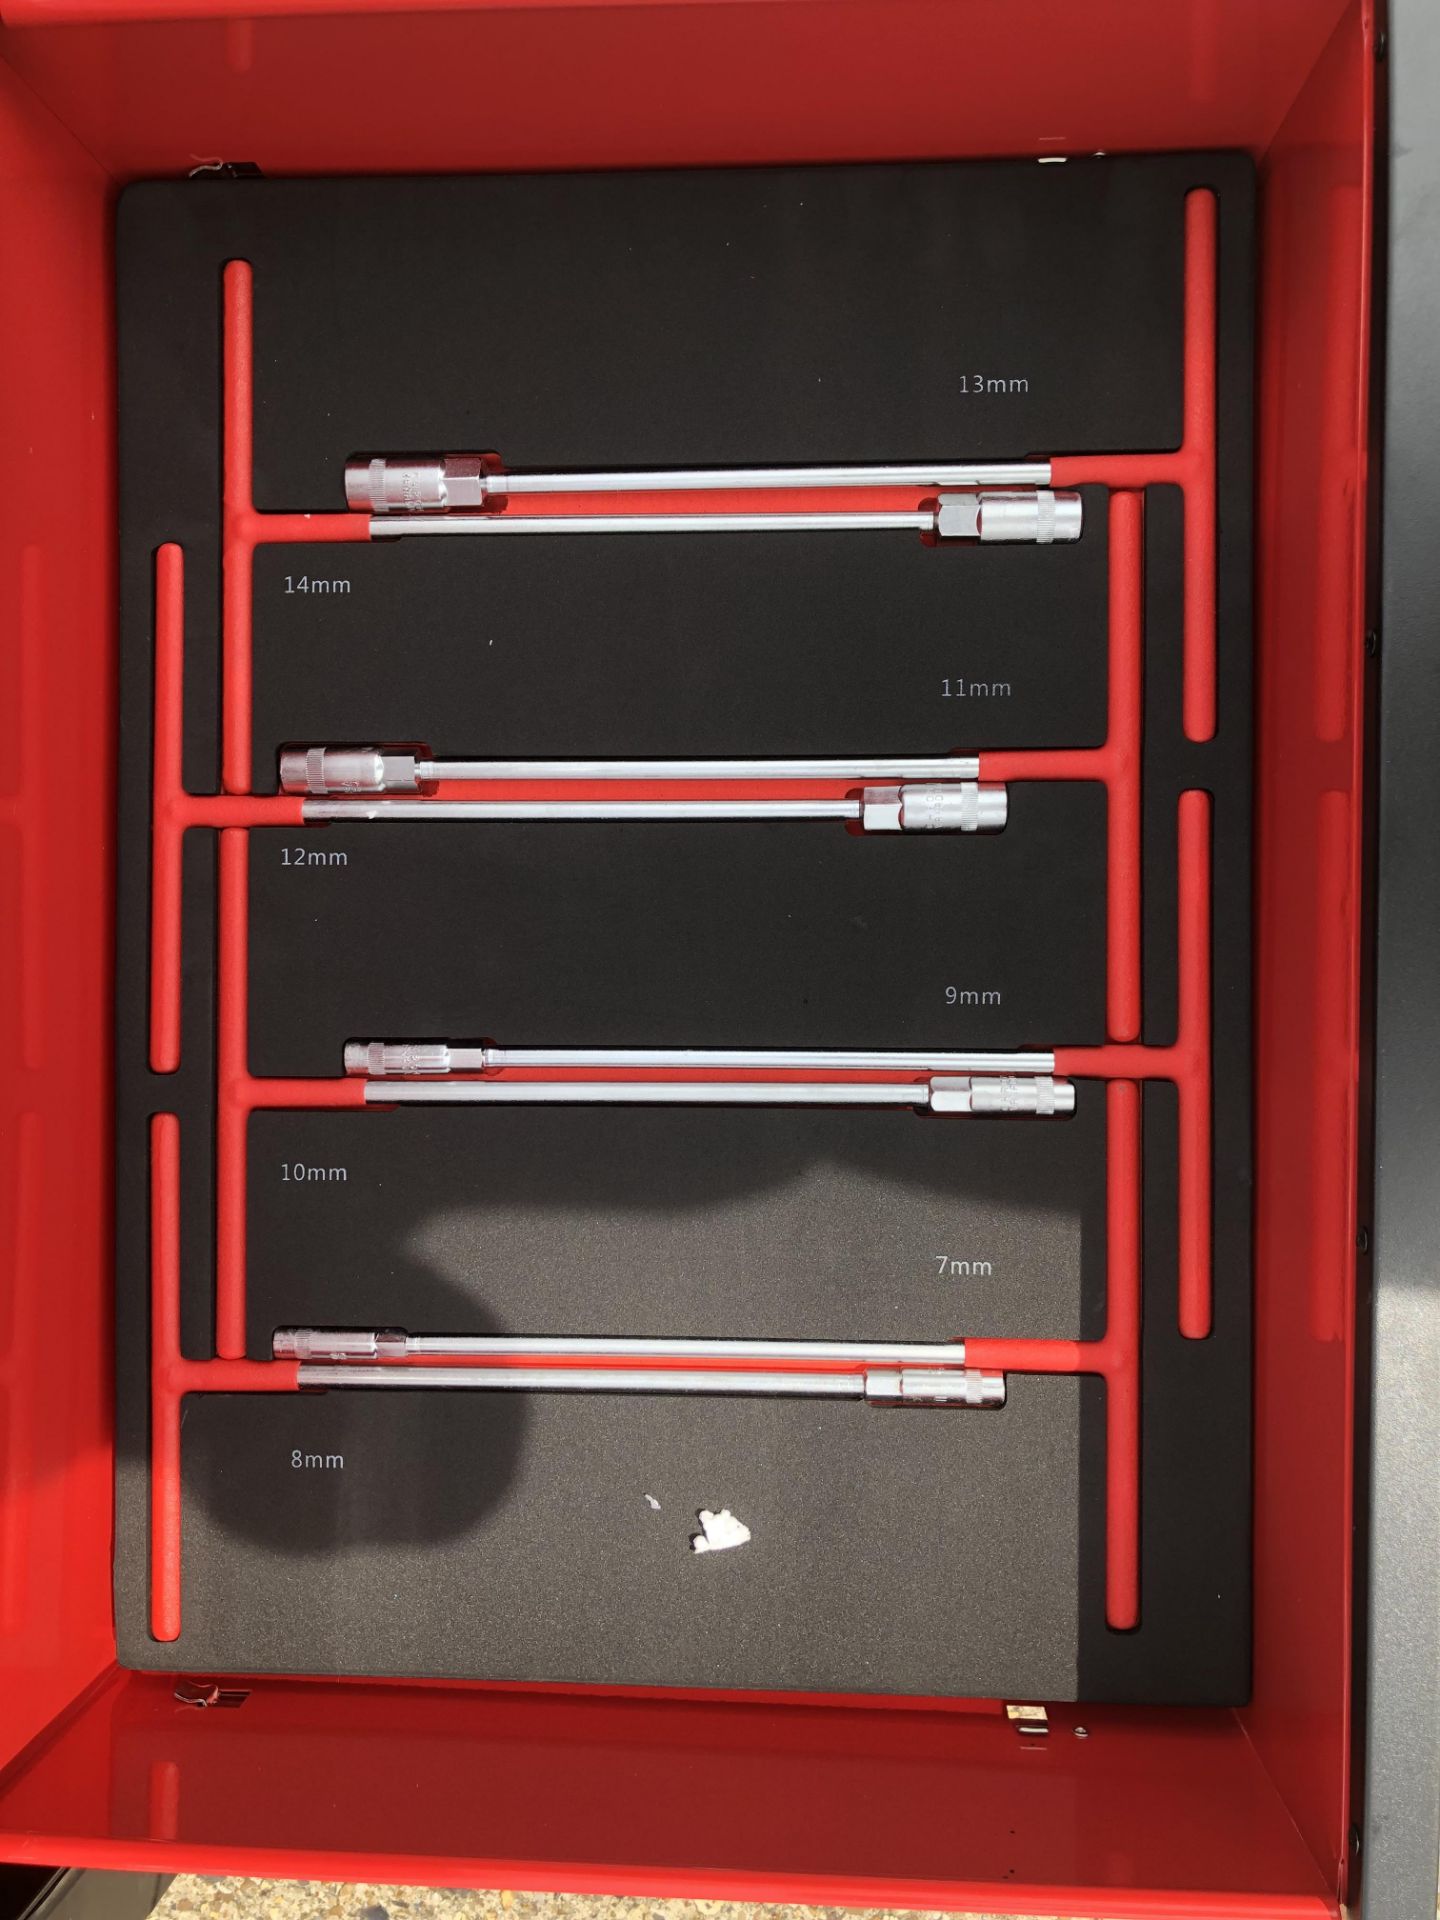 V Brand New Professional Locking Garage Tool Trolley/Cabinet (Red/Blue) with Metal Top and 7 Drawers - Image 8 of 8